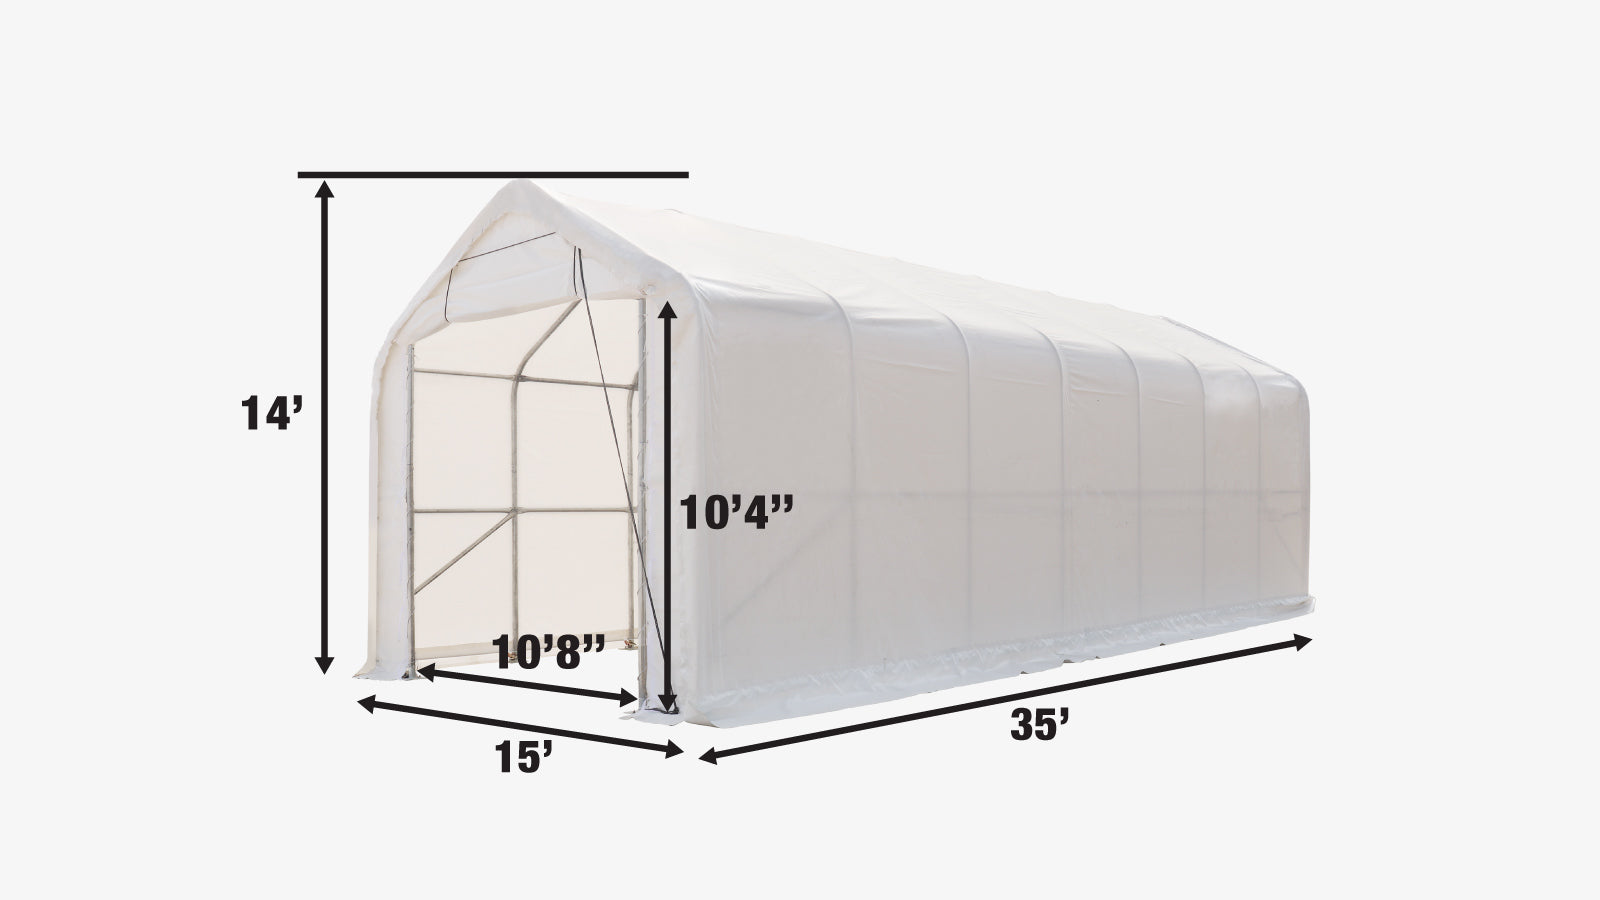 TMG Industrial 15’ x 35’ RV/Motorhome Storage Shelter, 17 oz PVC Fabric Cover, Front Roll-Up Door, Enclosed Rear Wall, 3-Layer Galvanized Steel Frame, 10’ Straight Sidewalls, TMG-ST1535-specifications-image